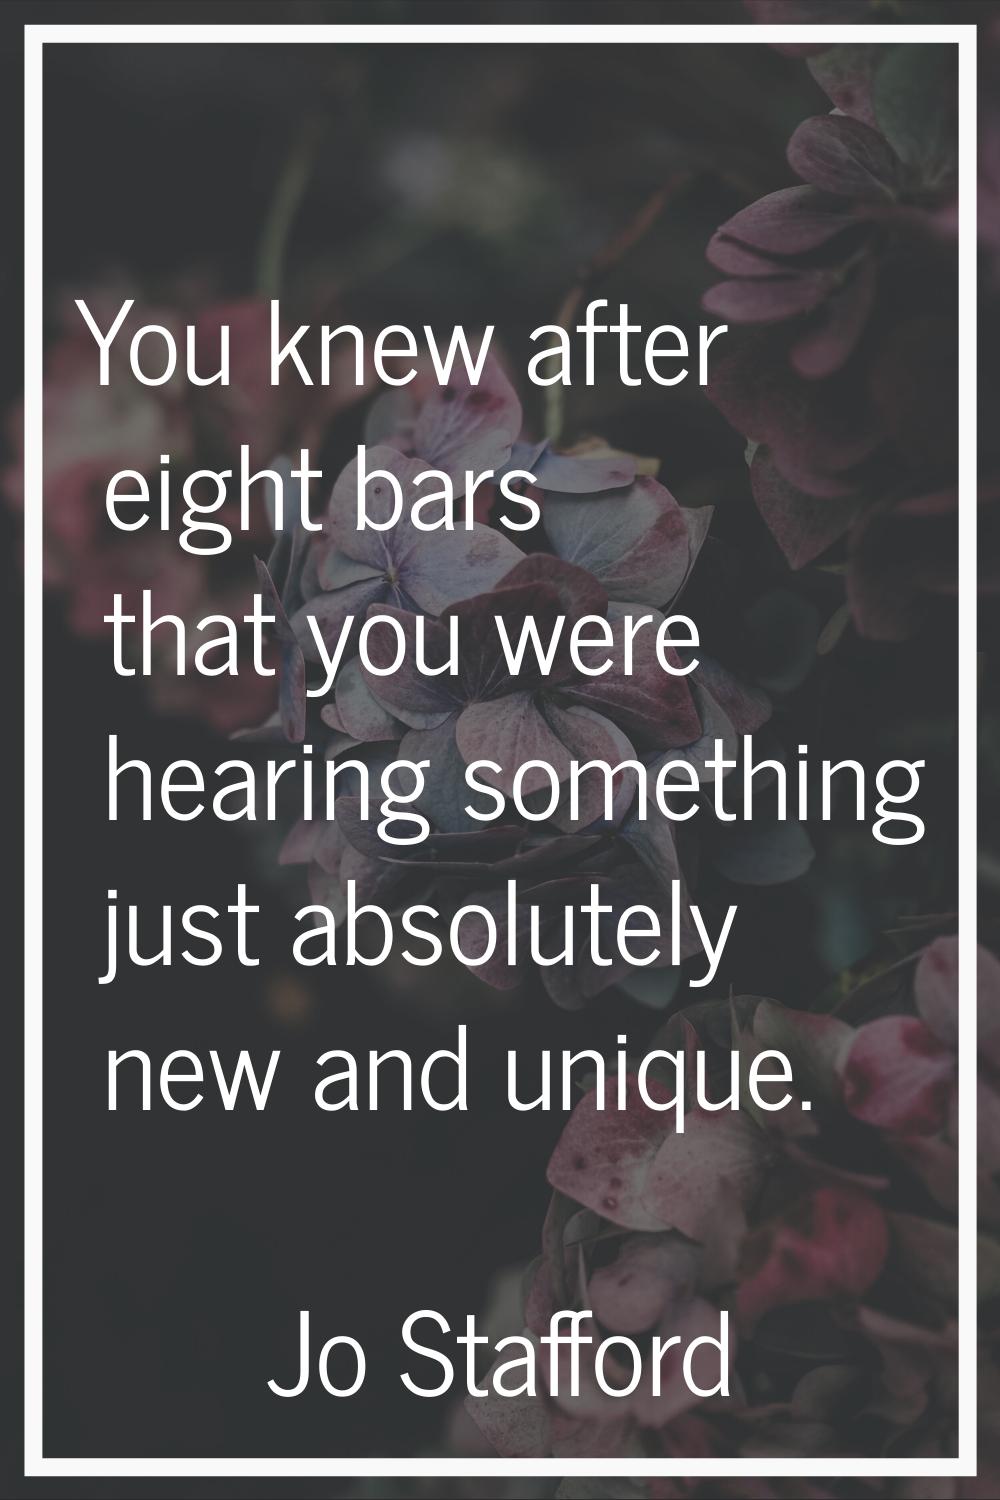 You knew after eight bars that you were hearing something just absolutely new and unique.